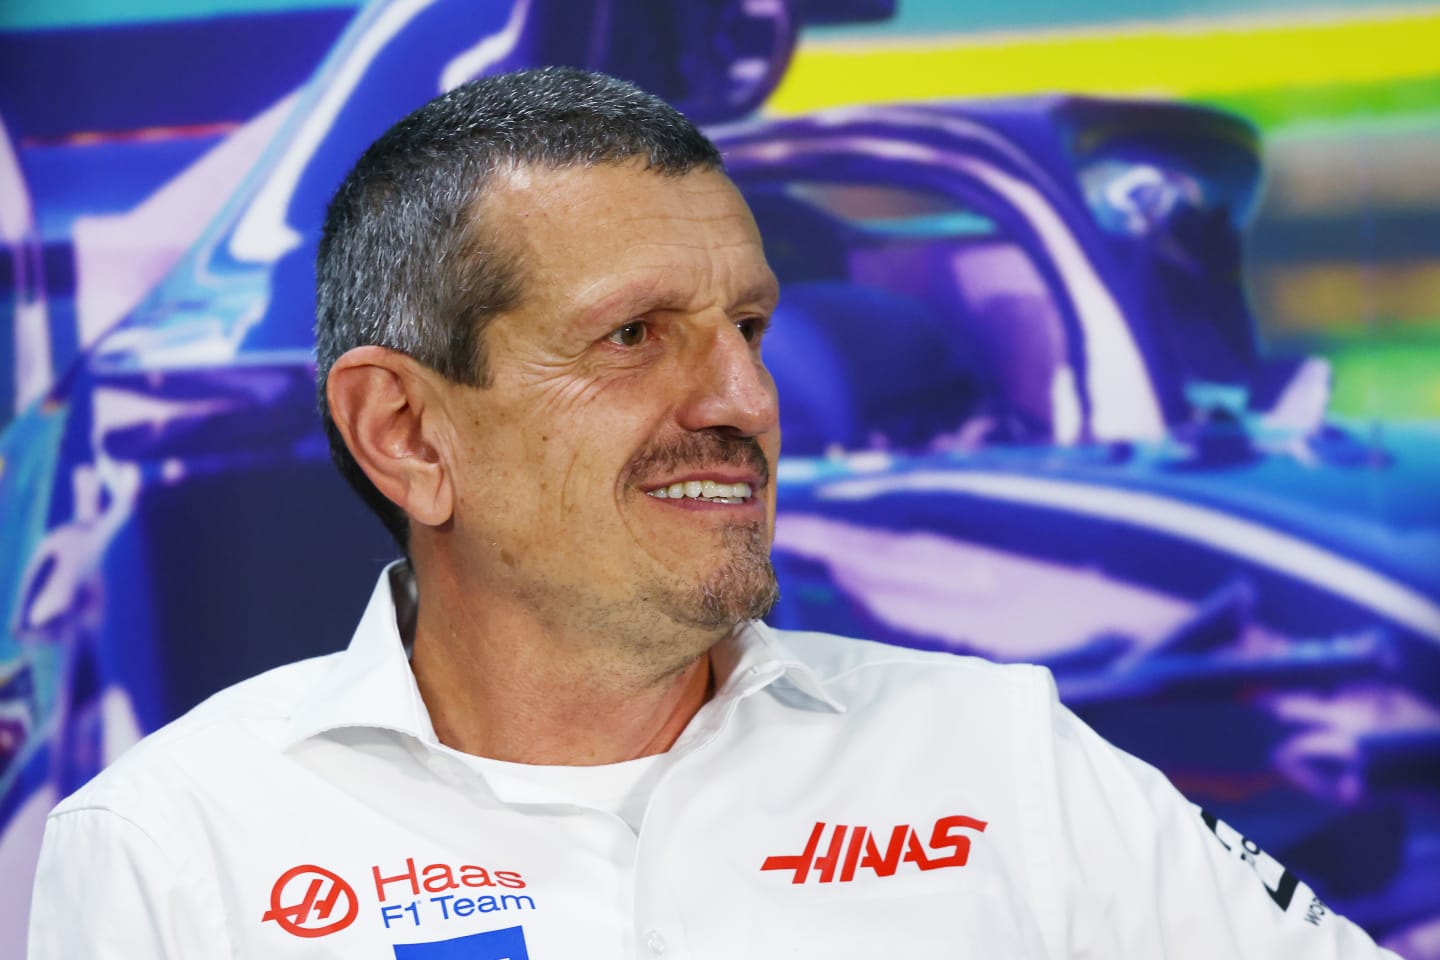 SAO PAULO, BRAZIL - NOVEMBER 12: Haas F1 Team Principal Guenther Steiner attends a press conference prior to practice ahead of the F1 Grand Prix of Brazil at Autodromo Jose Carlos Pace on November 12, 2022 in Sao Paulo, Brazil. (Photo by Bryn Lennon/Getty Images)